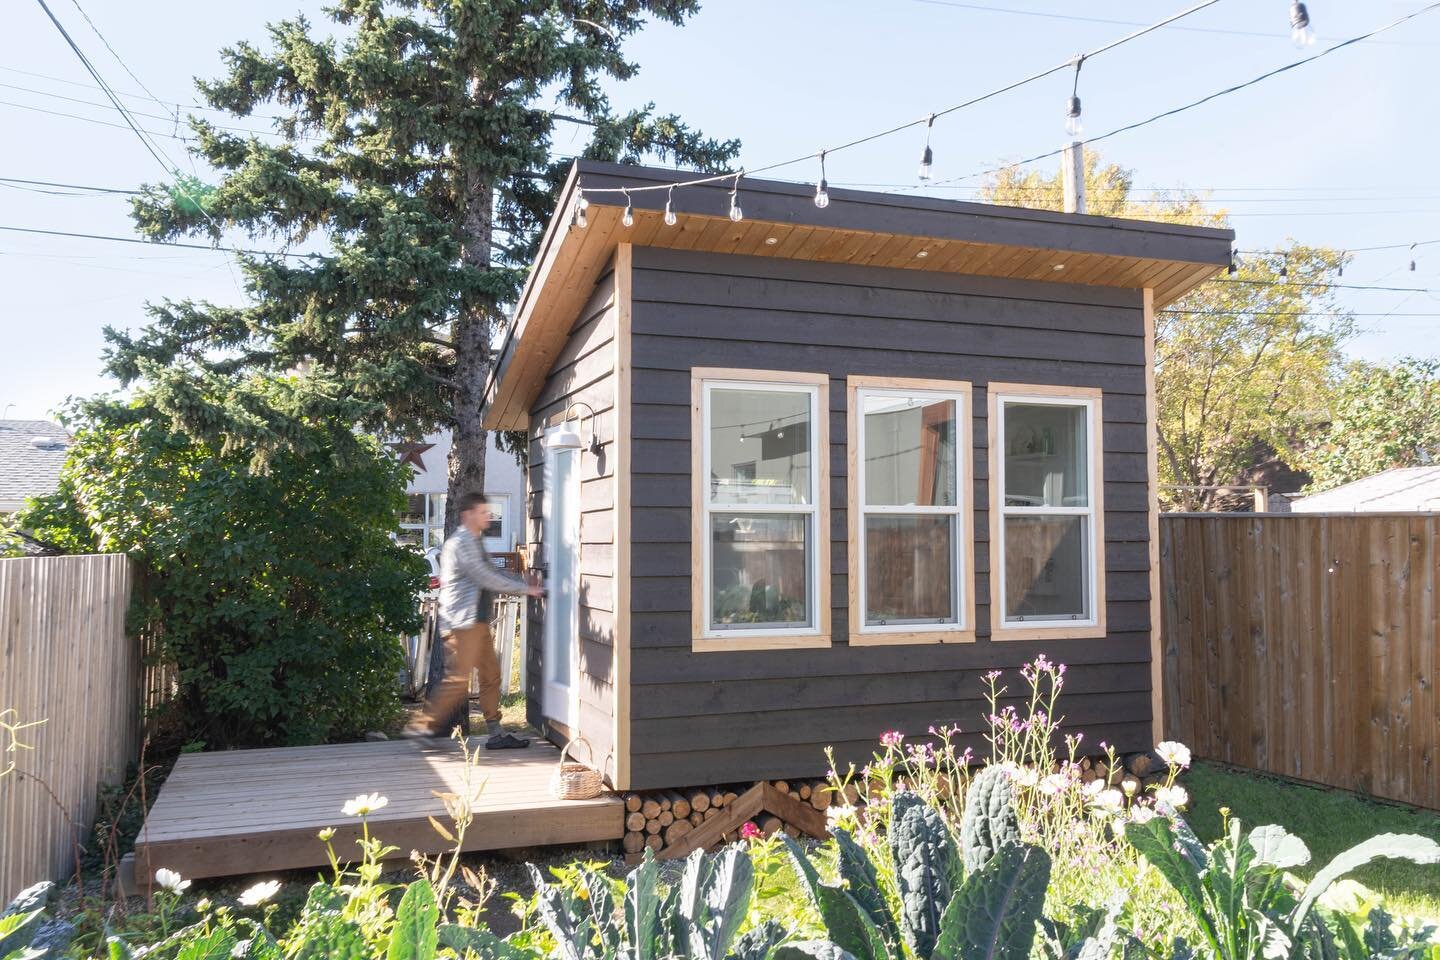 One year of working in the cabin studio.

It was a learning process building this together. From designing to framing to finding pre-loved cedar siding and installing the littlest wood stove.  Walking through our garden to work every day is a dream c